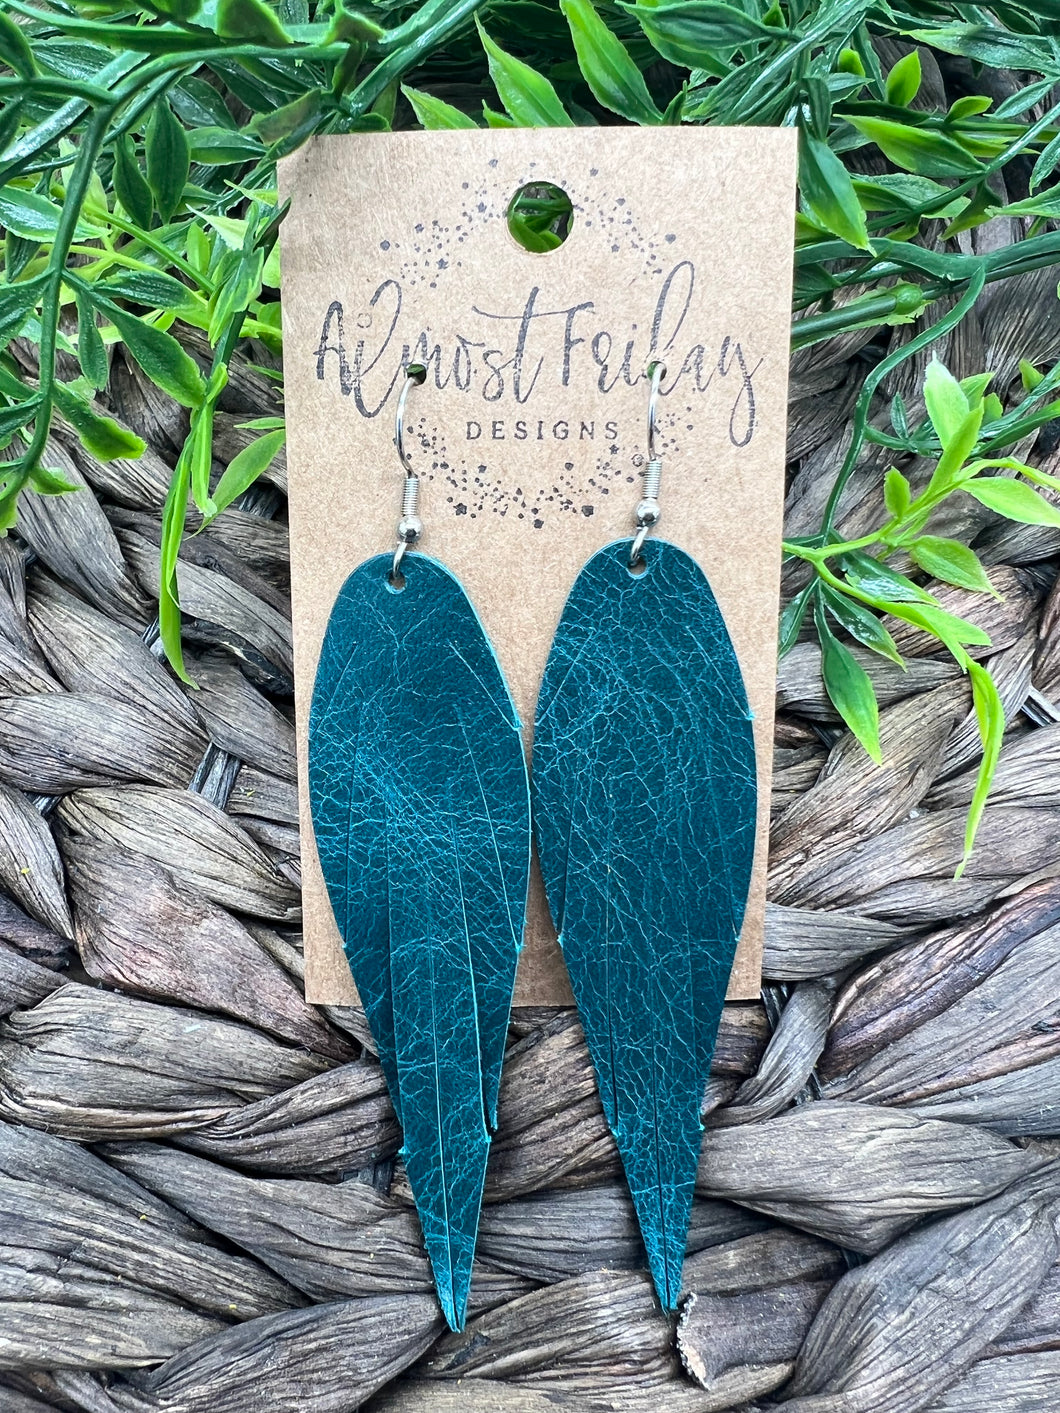 Genuine Leather Earrings - Feather - Feather Earrings - Teal - Turquoise - Statement Earrings - Fringe